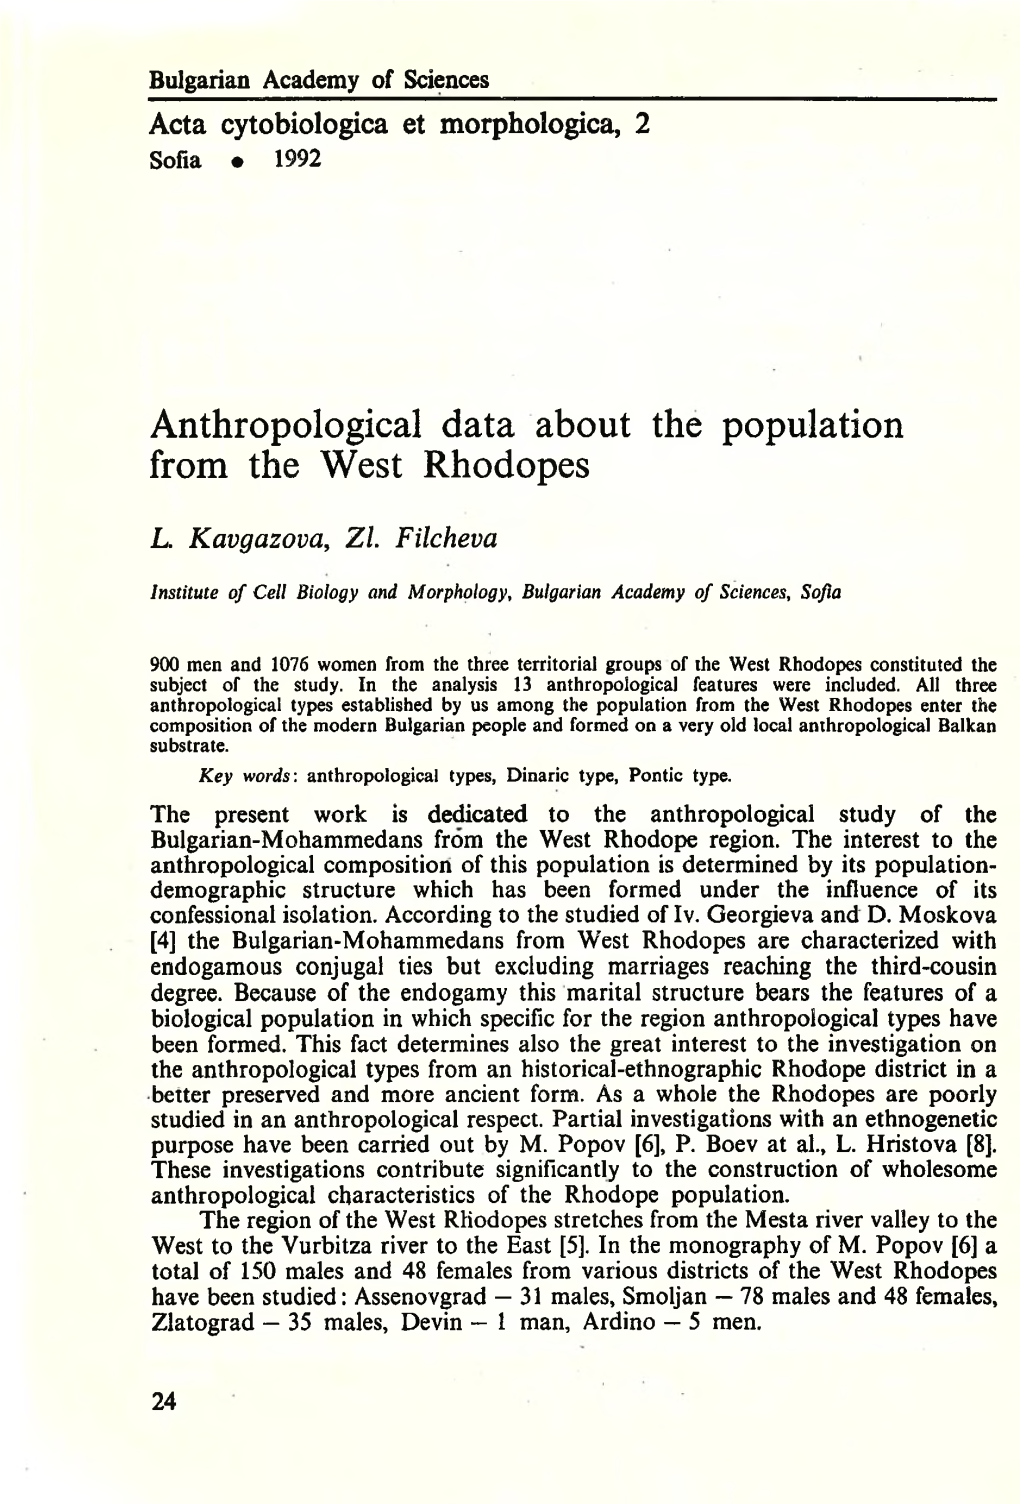 Anthropological Data About the Population from the West Rhodopes